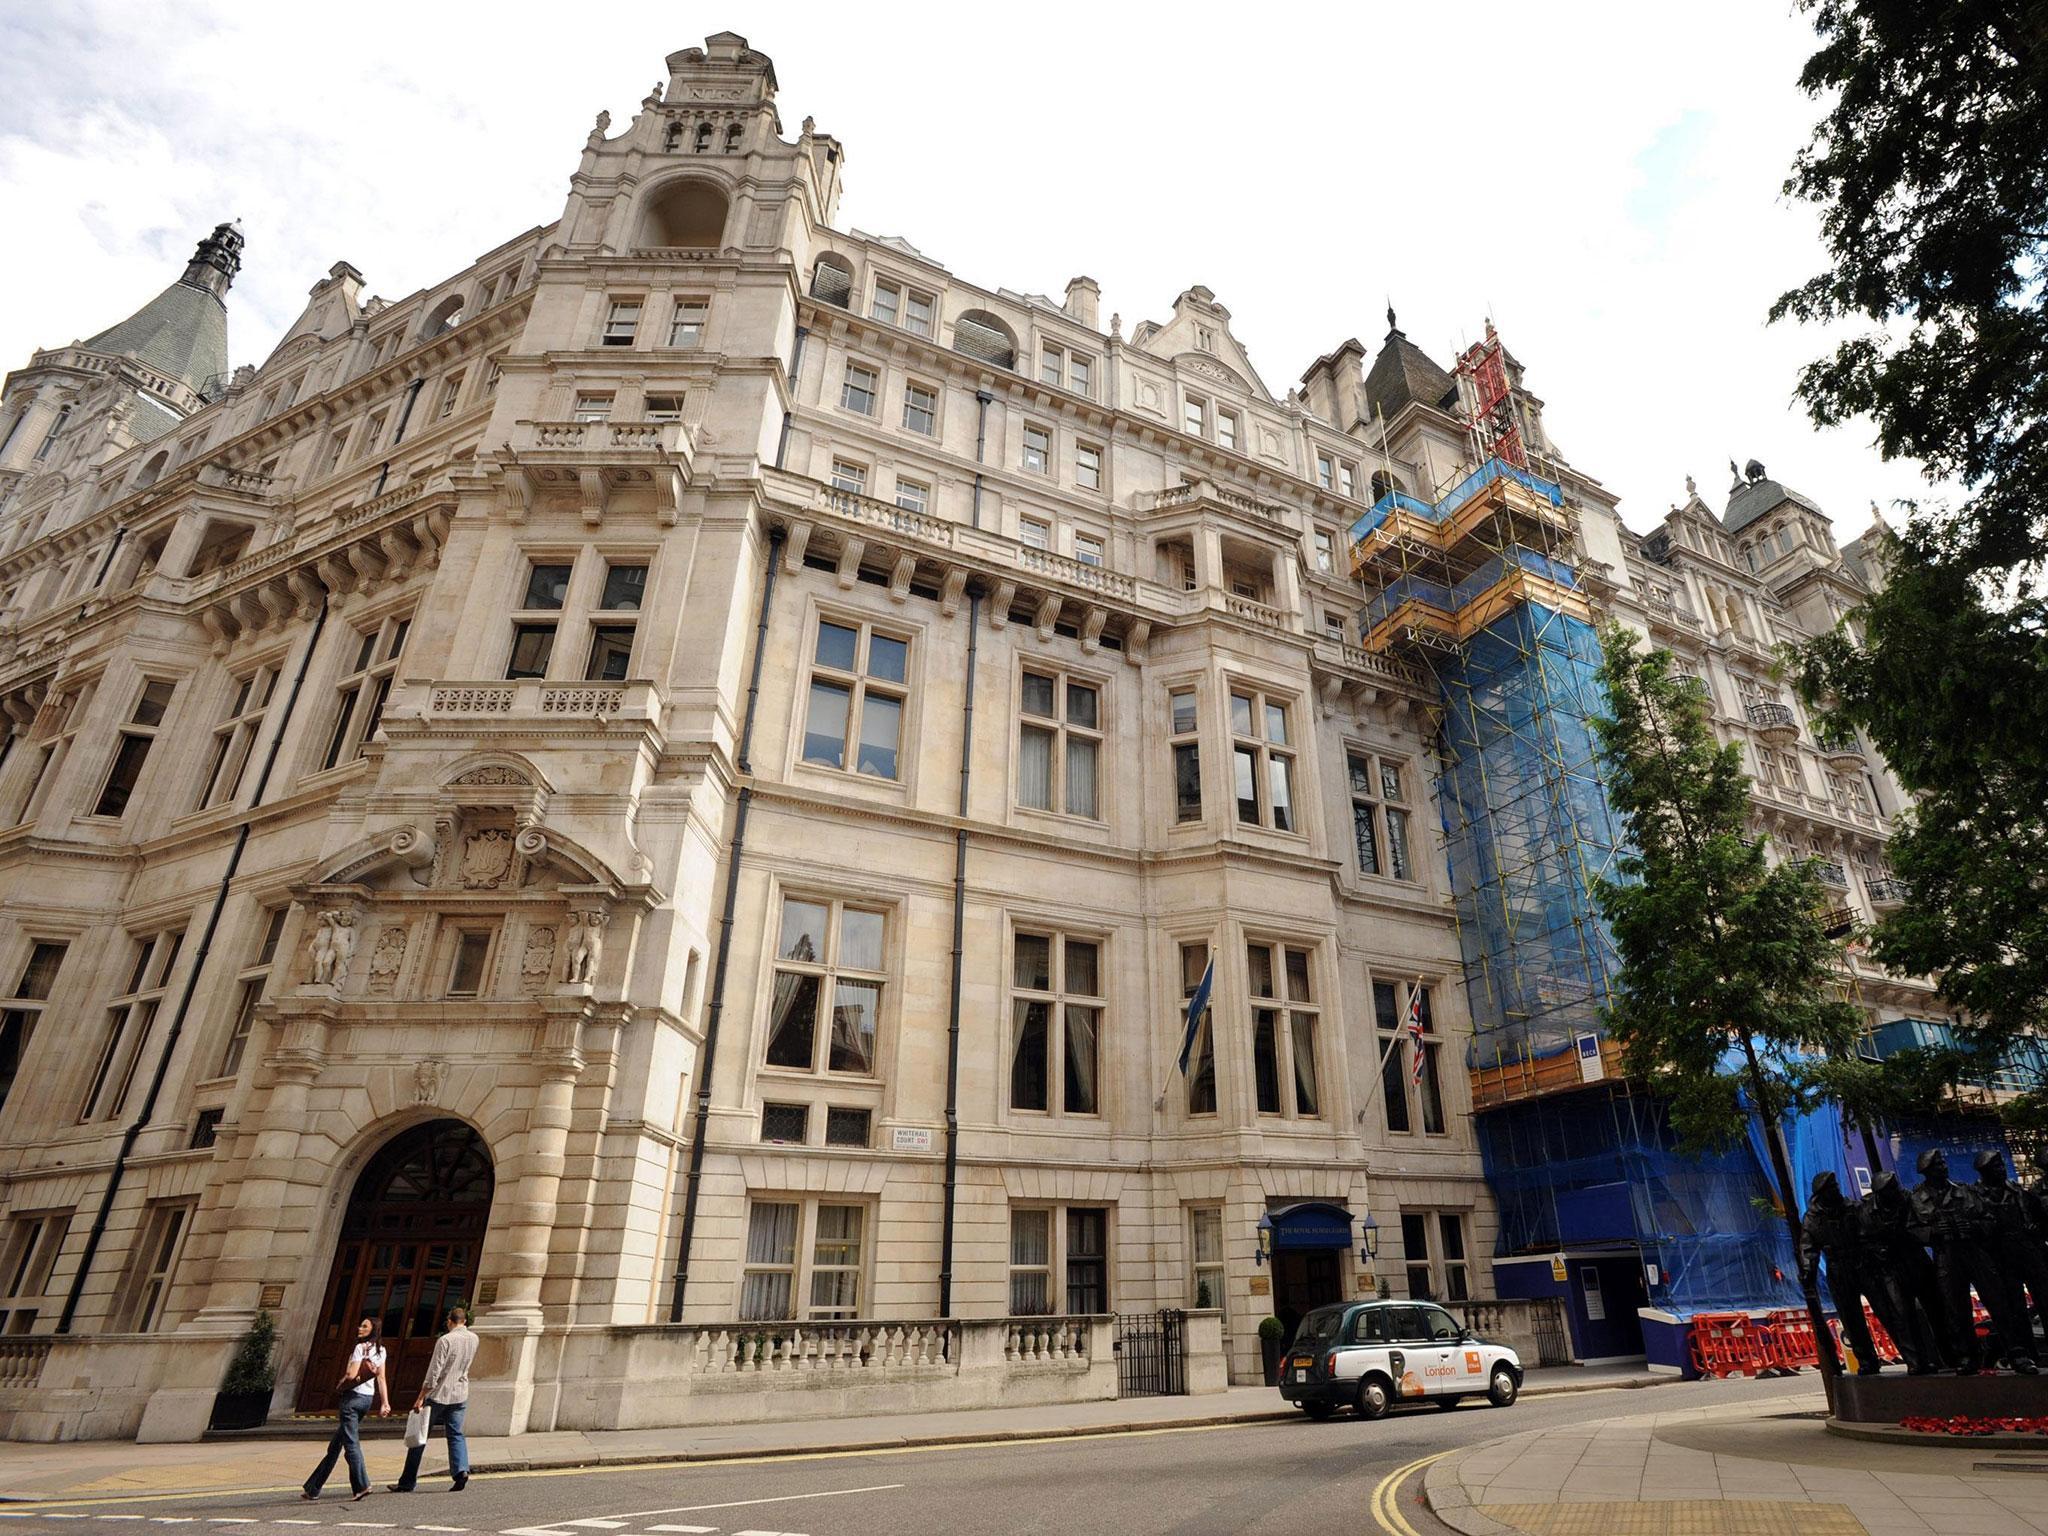 The Royal Horseguards hotel, a five-star luxury London hotel located near Embankment, was given a hygiene rating of just two